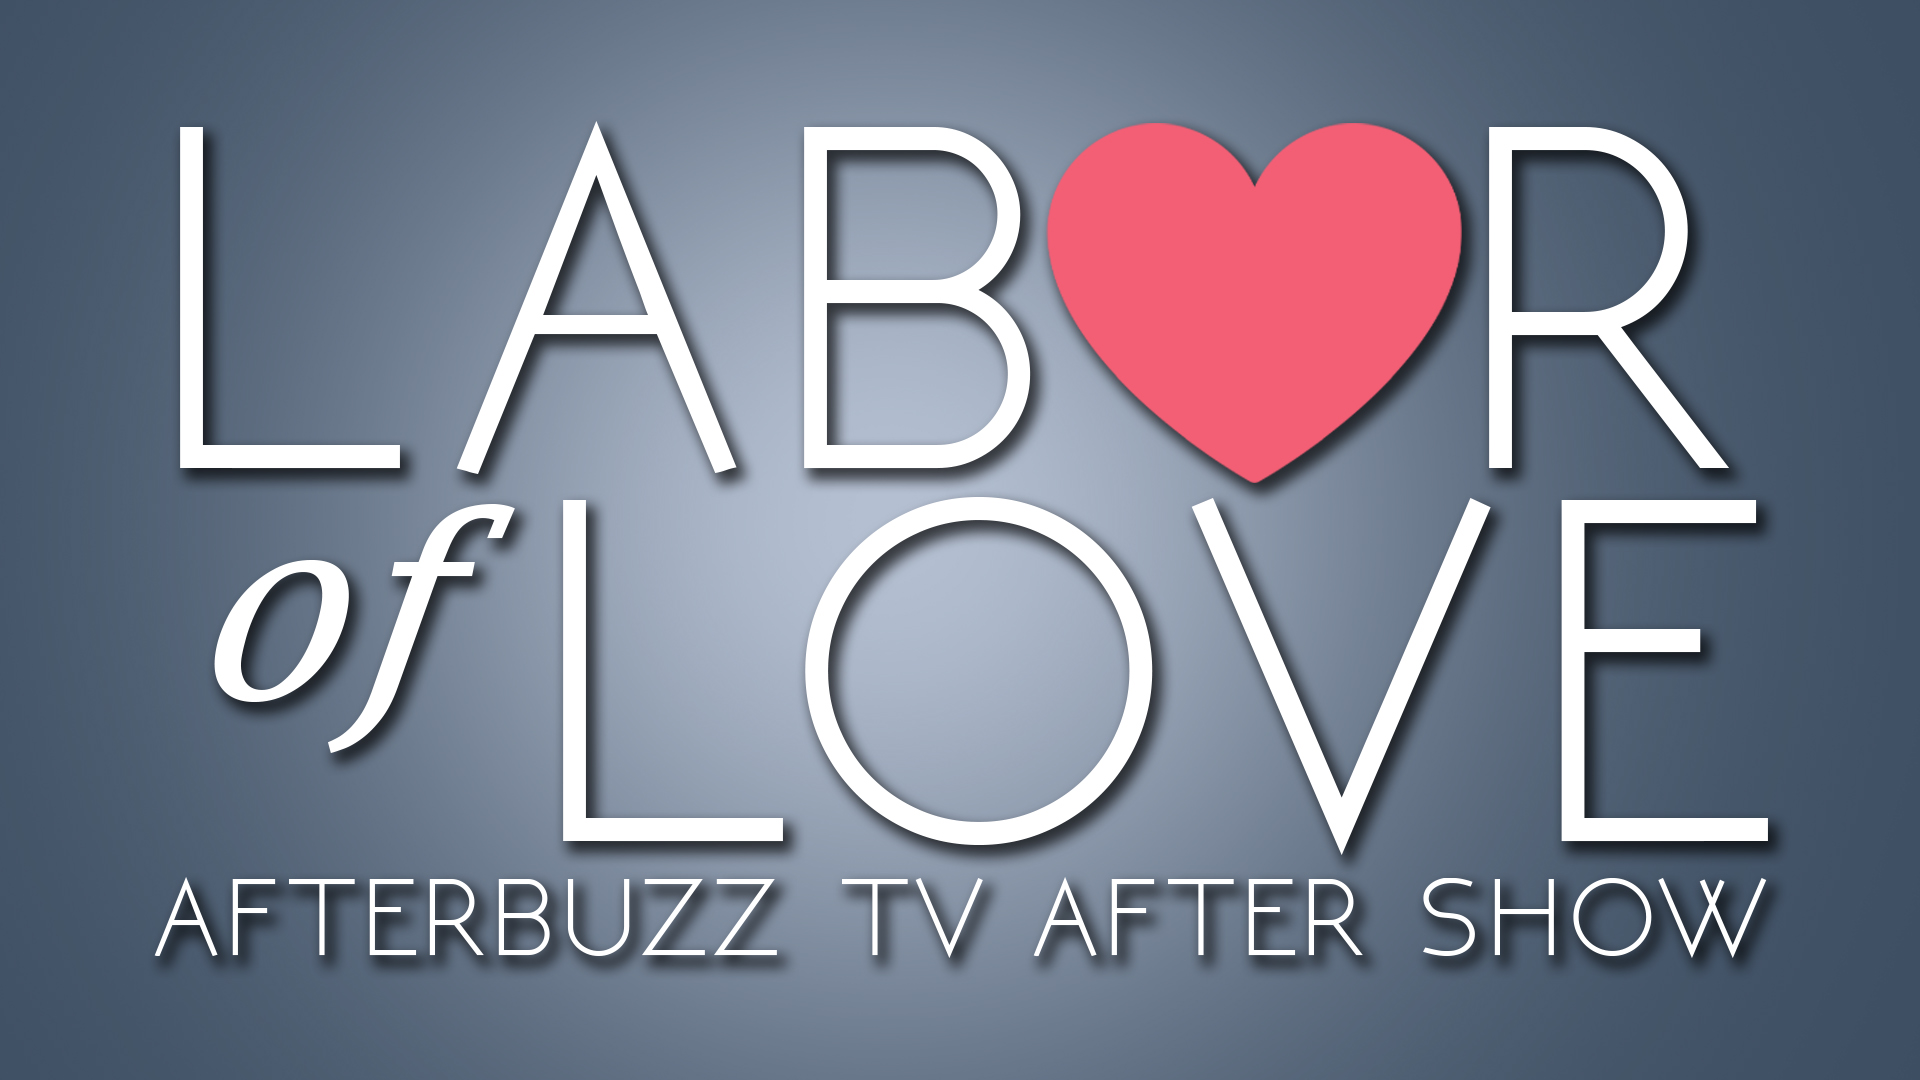 Labor of Love S1 E1 Recap & After Show Who's Ready to Make Babies